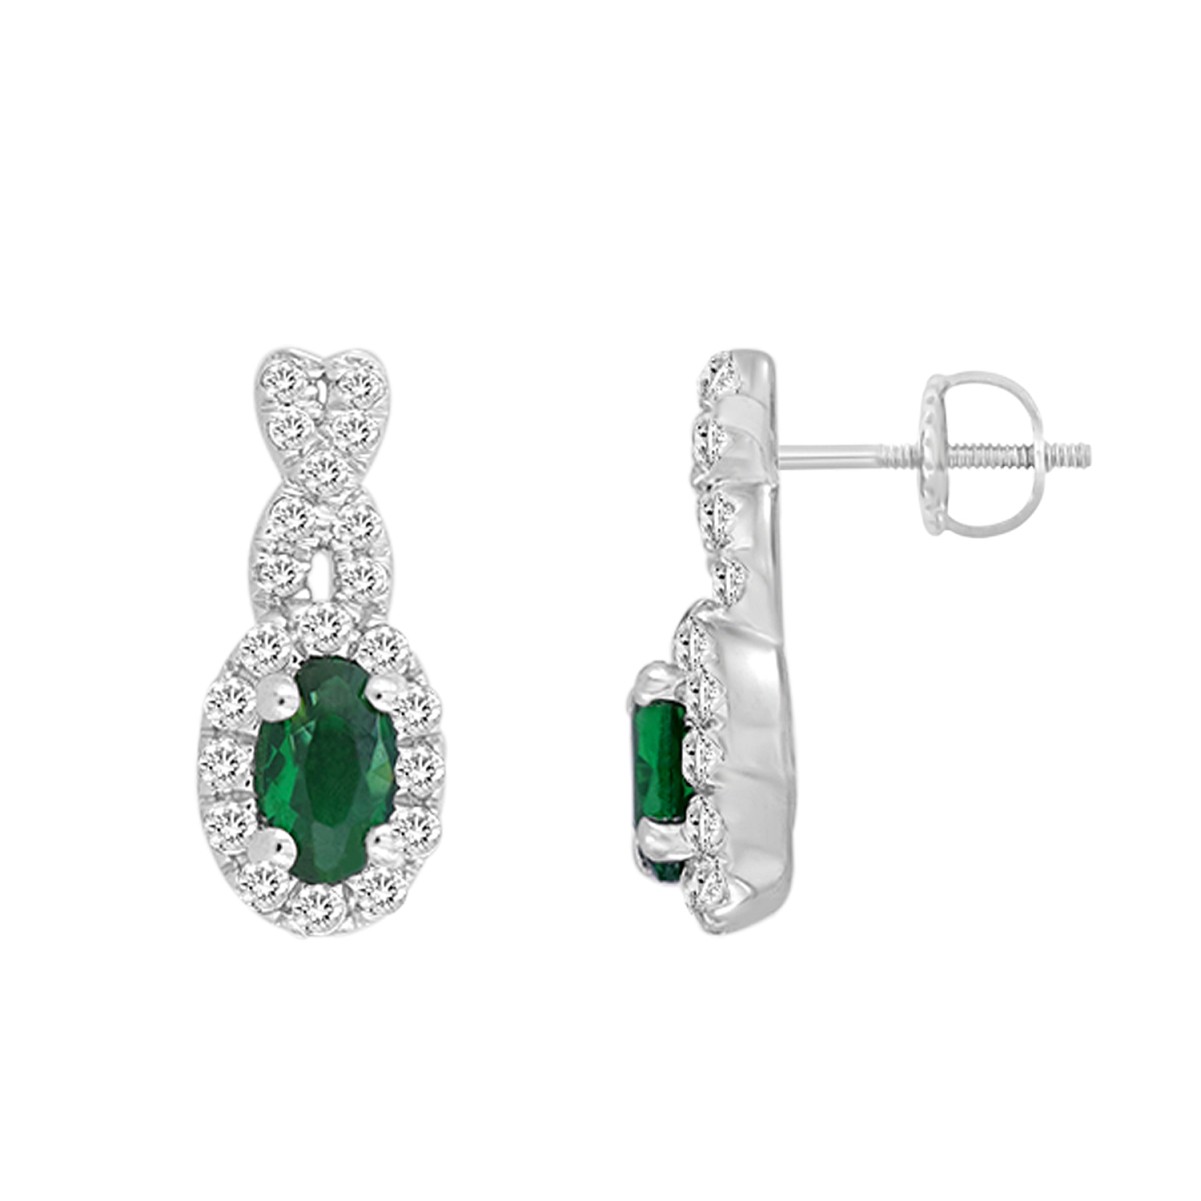 18K WHITE GOLD 7/8CT ROUND/OVAL DIAMOND LADIES EARRINGS(COLOR STONE OVAL GREEN EMERALD DIAMOND 1/2CT)